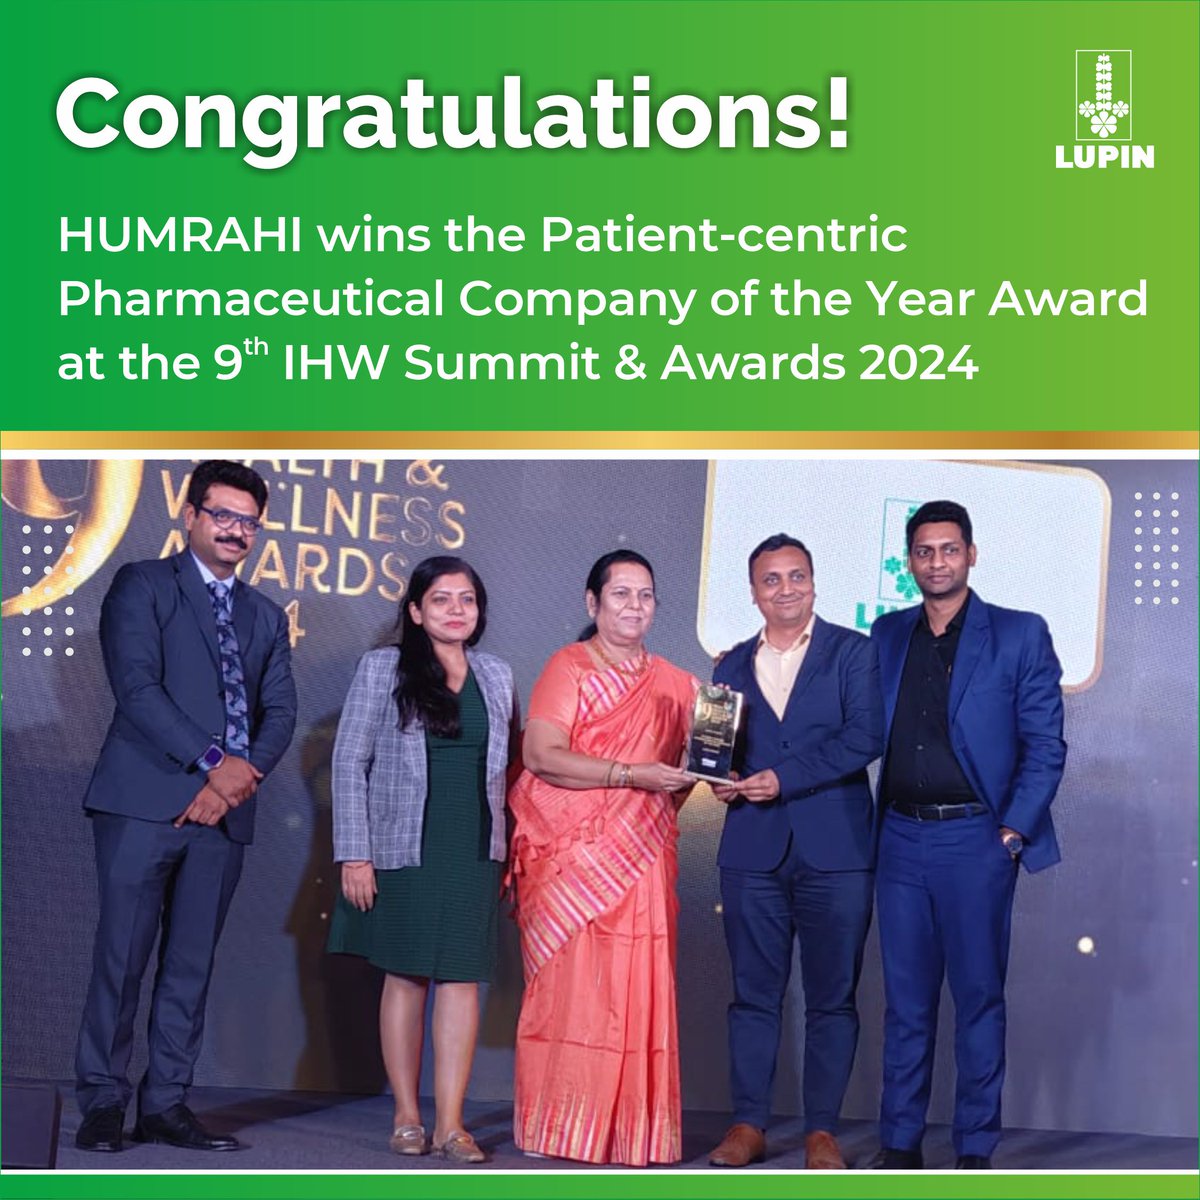 We are proud to announce that Humrahi, our patient support program for Diabetes management, has won us the 'Patient-centric Pharmaceutical Company of the Year' award. This recognition acknowledges our commitment to always prioritizing patient's needs.

#Lupin #Humrahi